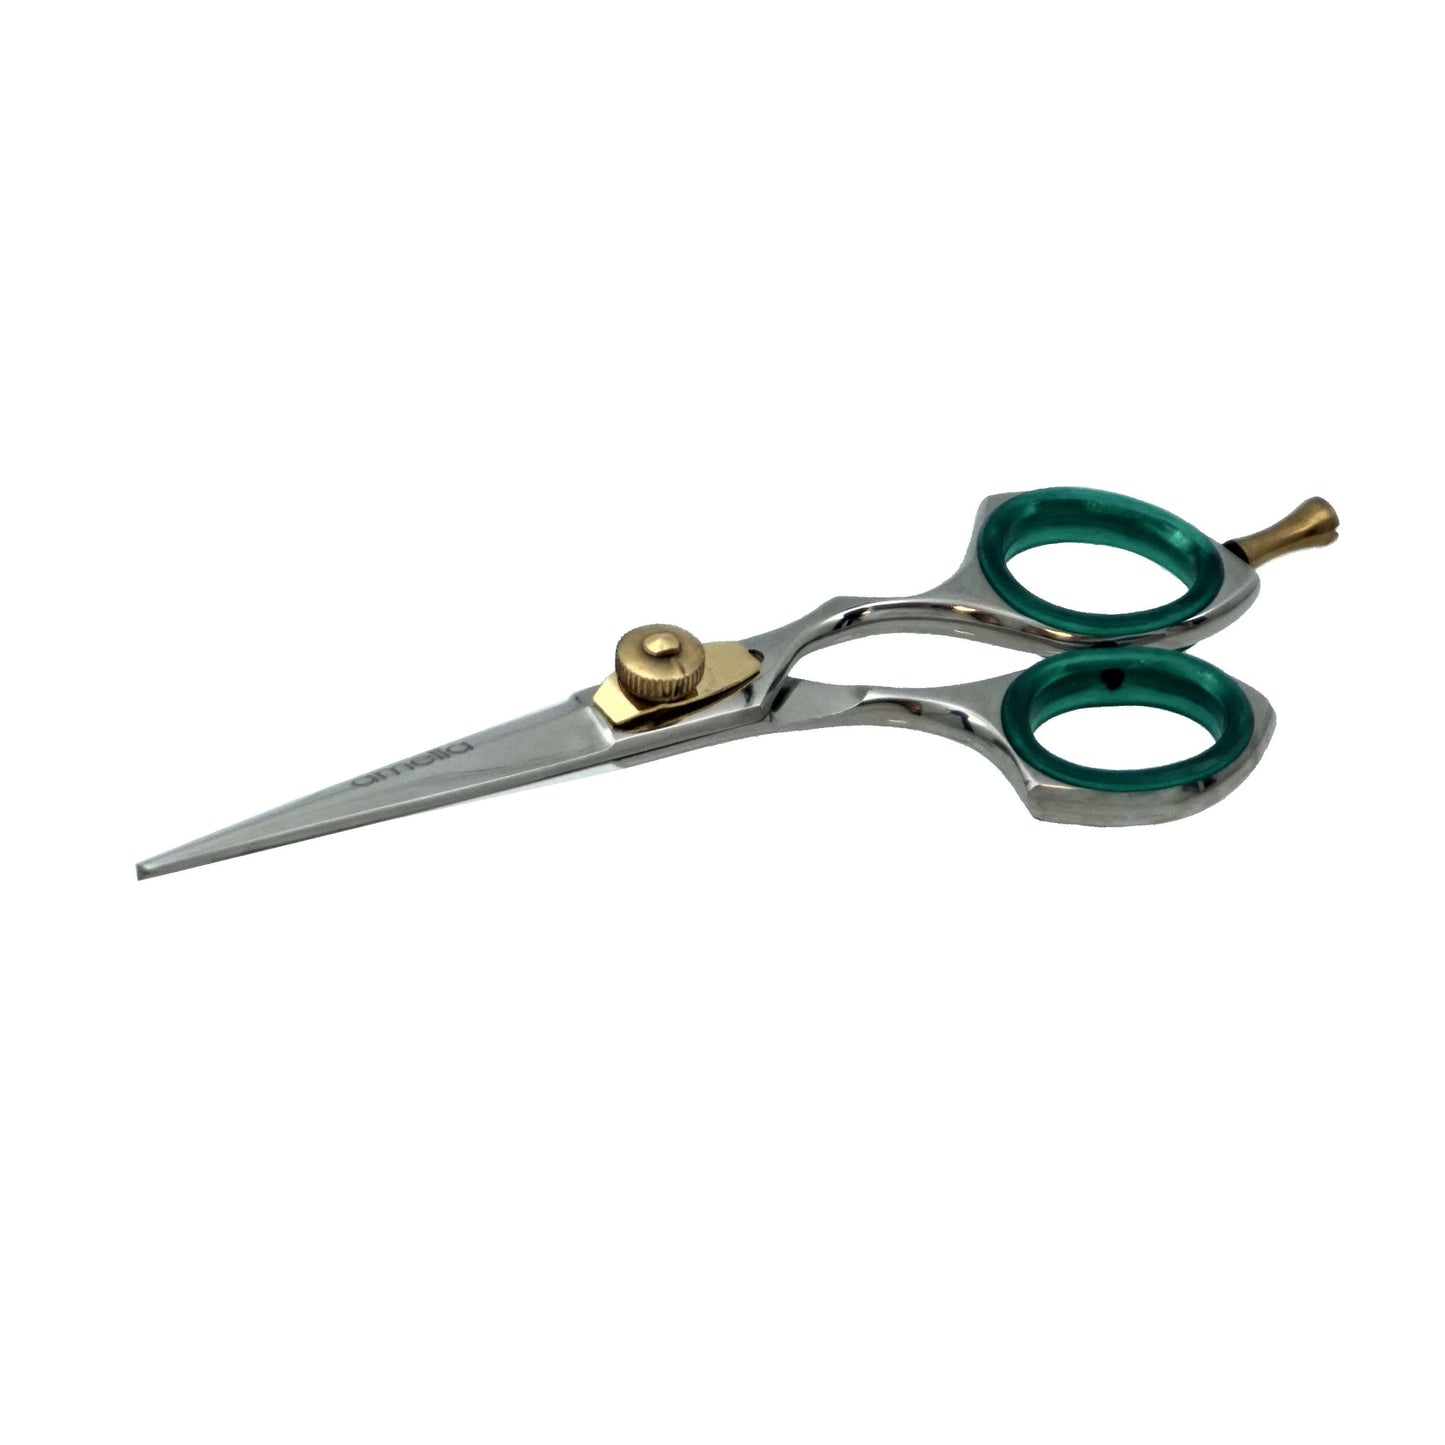 5" Right Handed, Stainless Steel Professional Shear, Removable Finger Rest